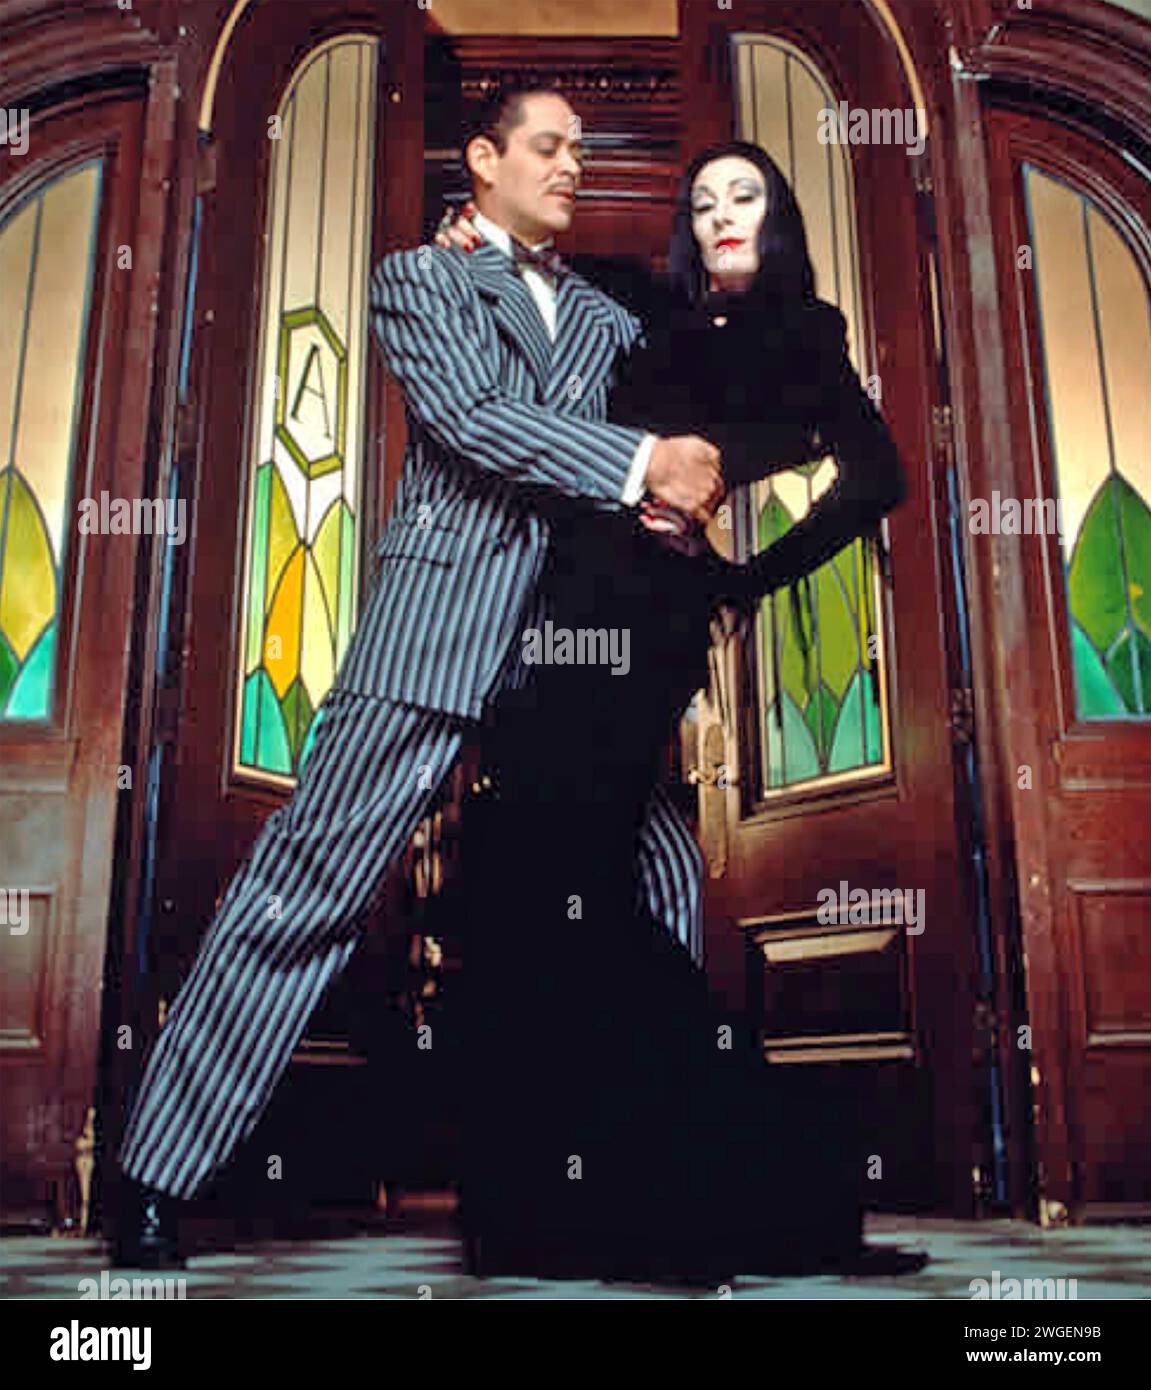 THE ADDAMS FAMILY 1991 Columbia Pictures film with Anjelica Huston as Morticia Addams and Raul Julia as Gomez Addams Stock Photo